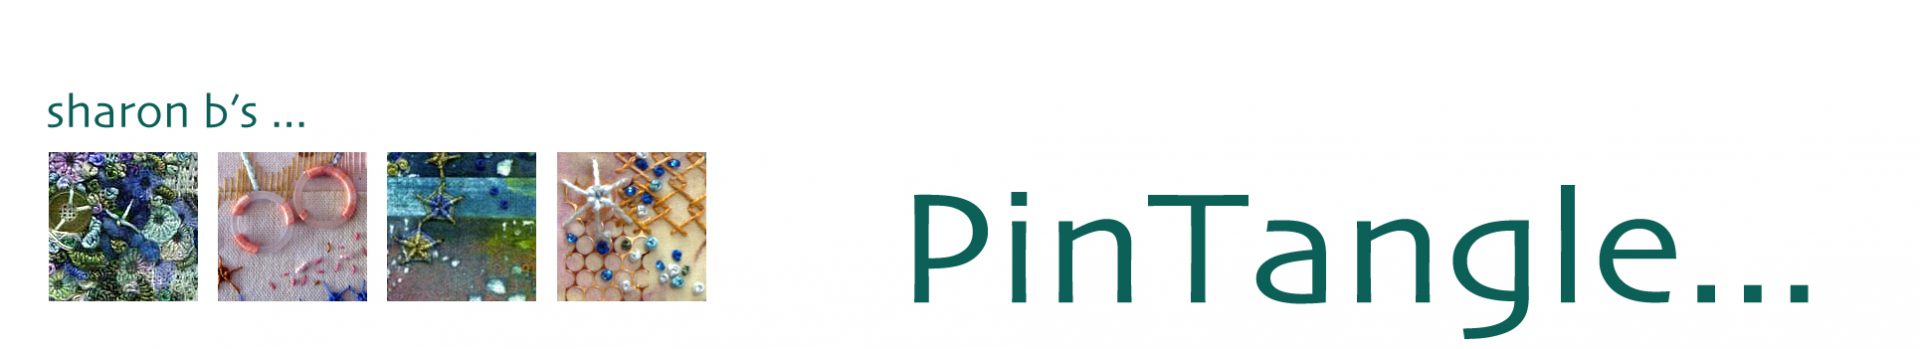 Some of the Resources on Pintangle